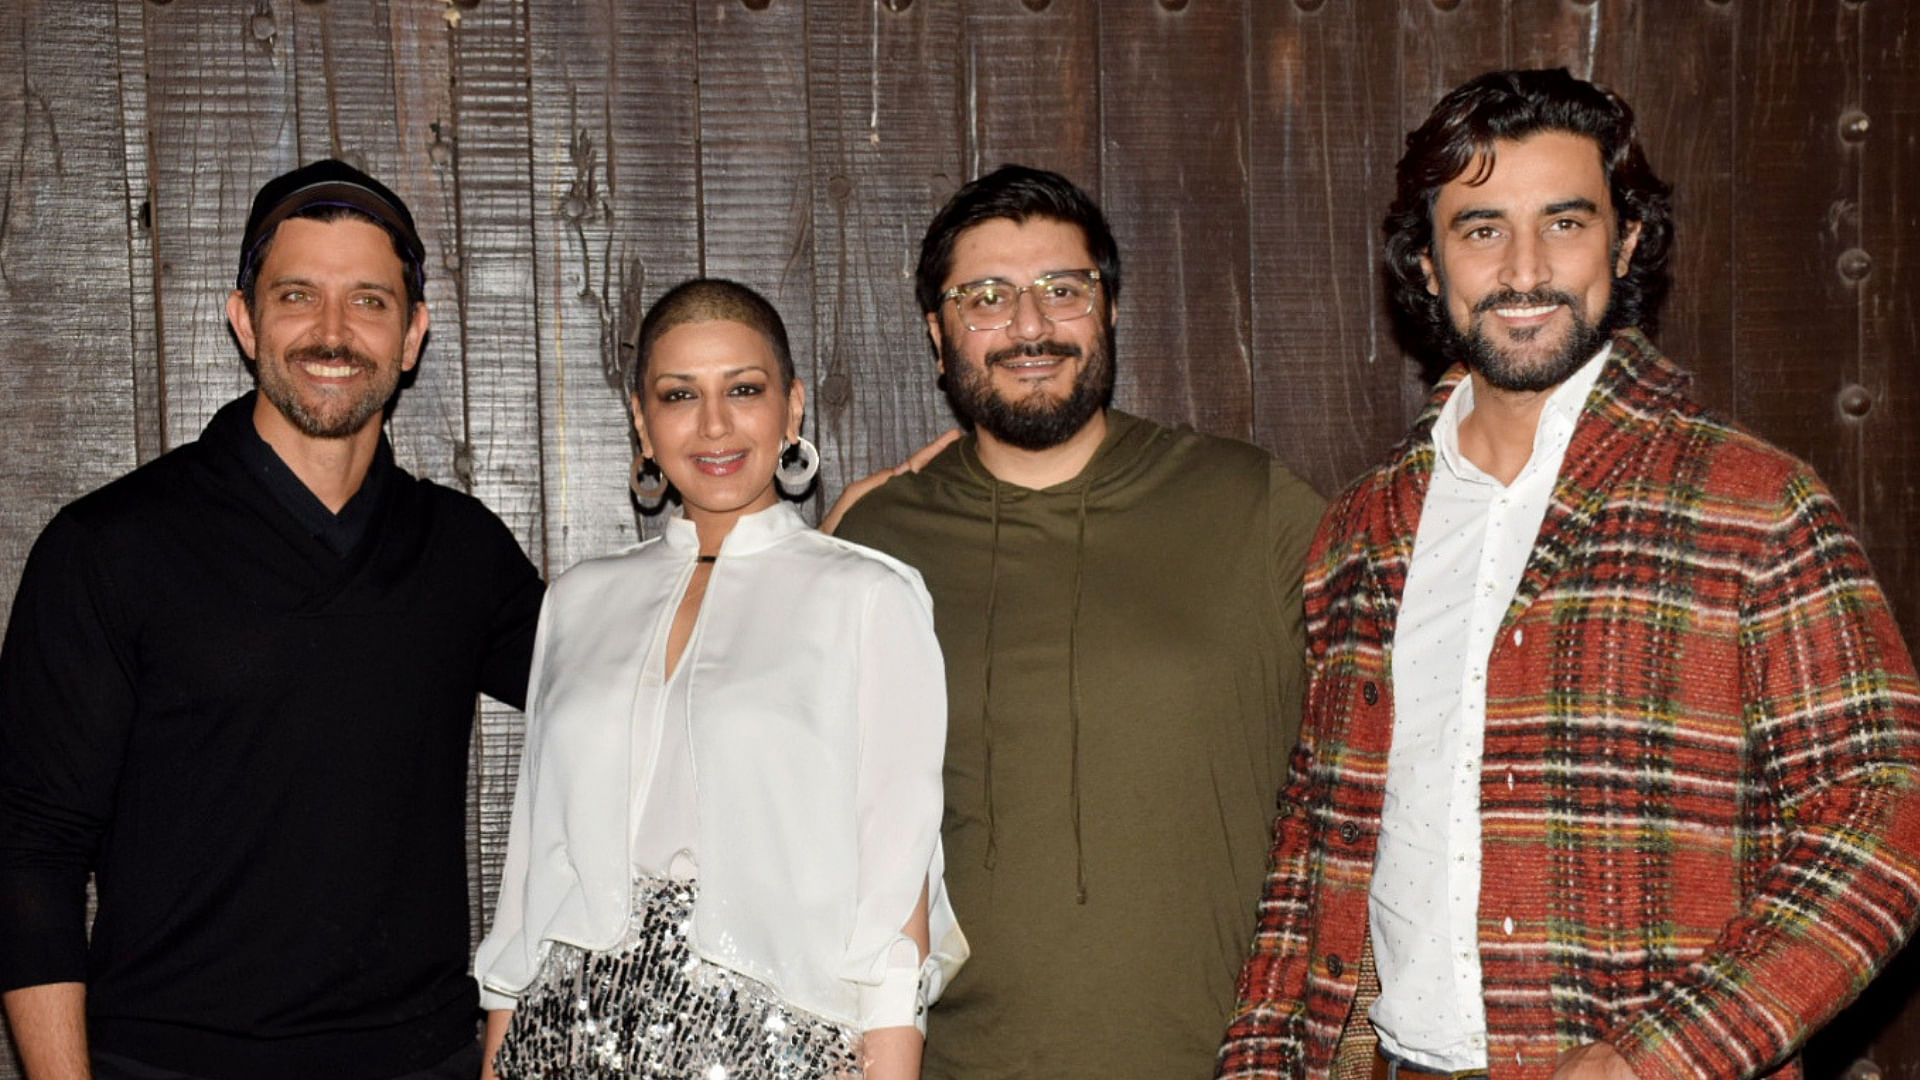 Sonali Bendre celebrated her birthday with Goldie Behl, Hrithik Roshan and Kunal Kapoor.